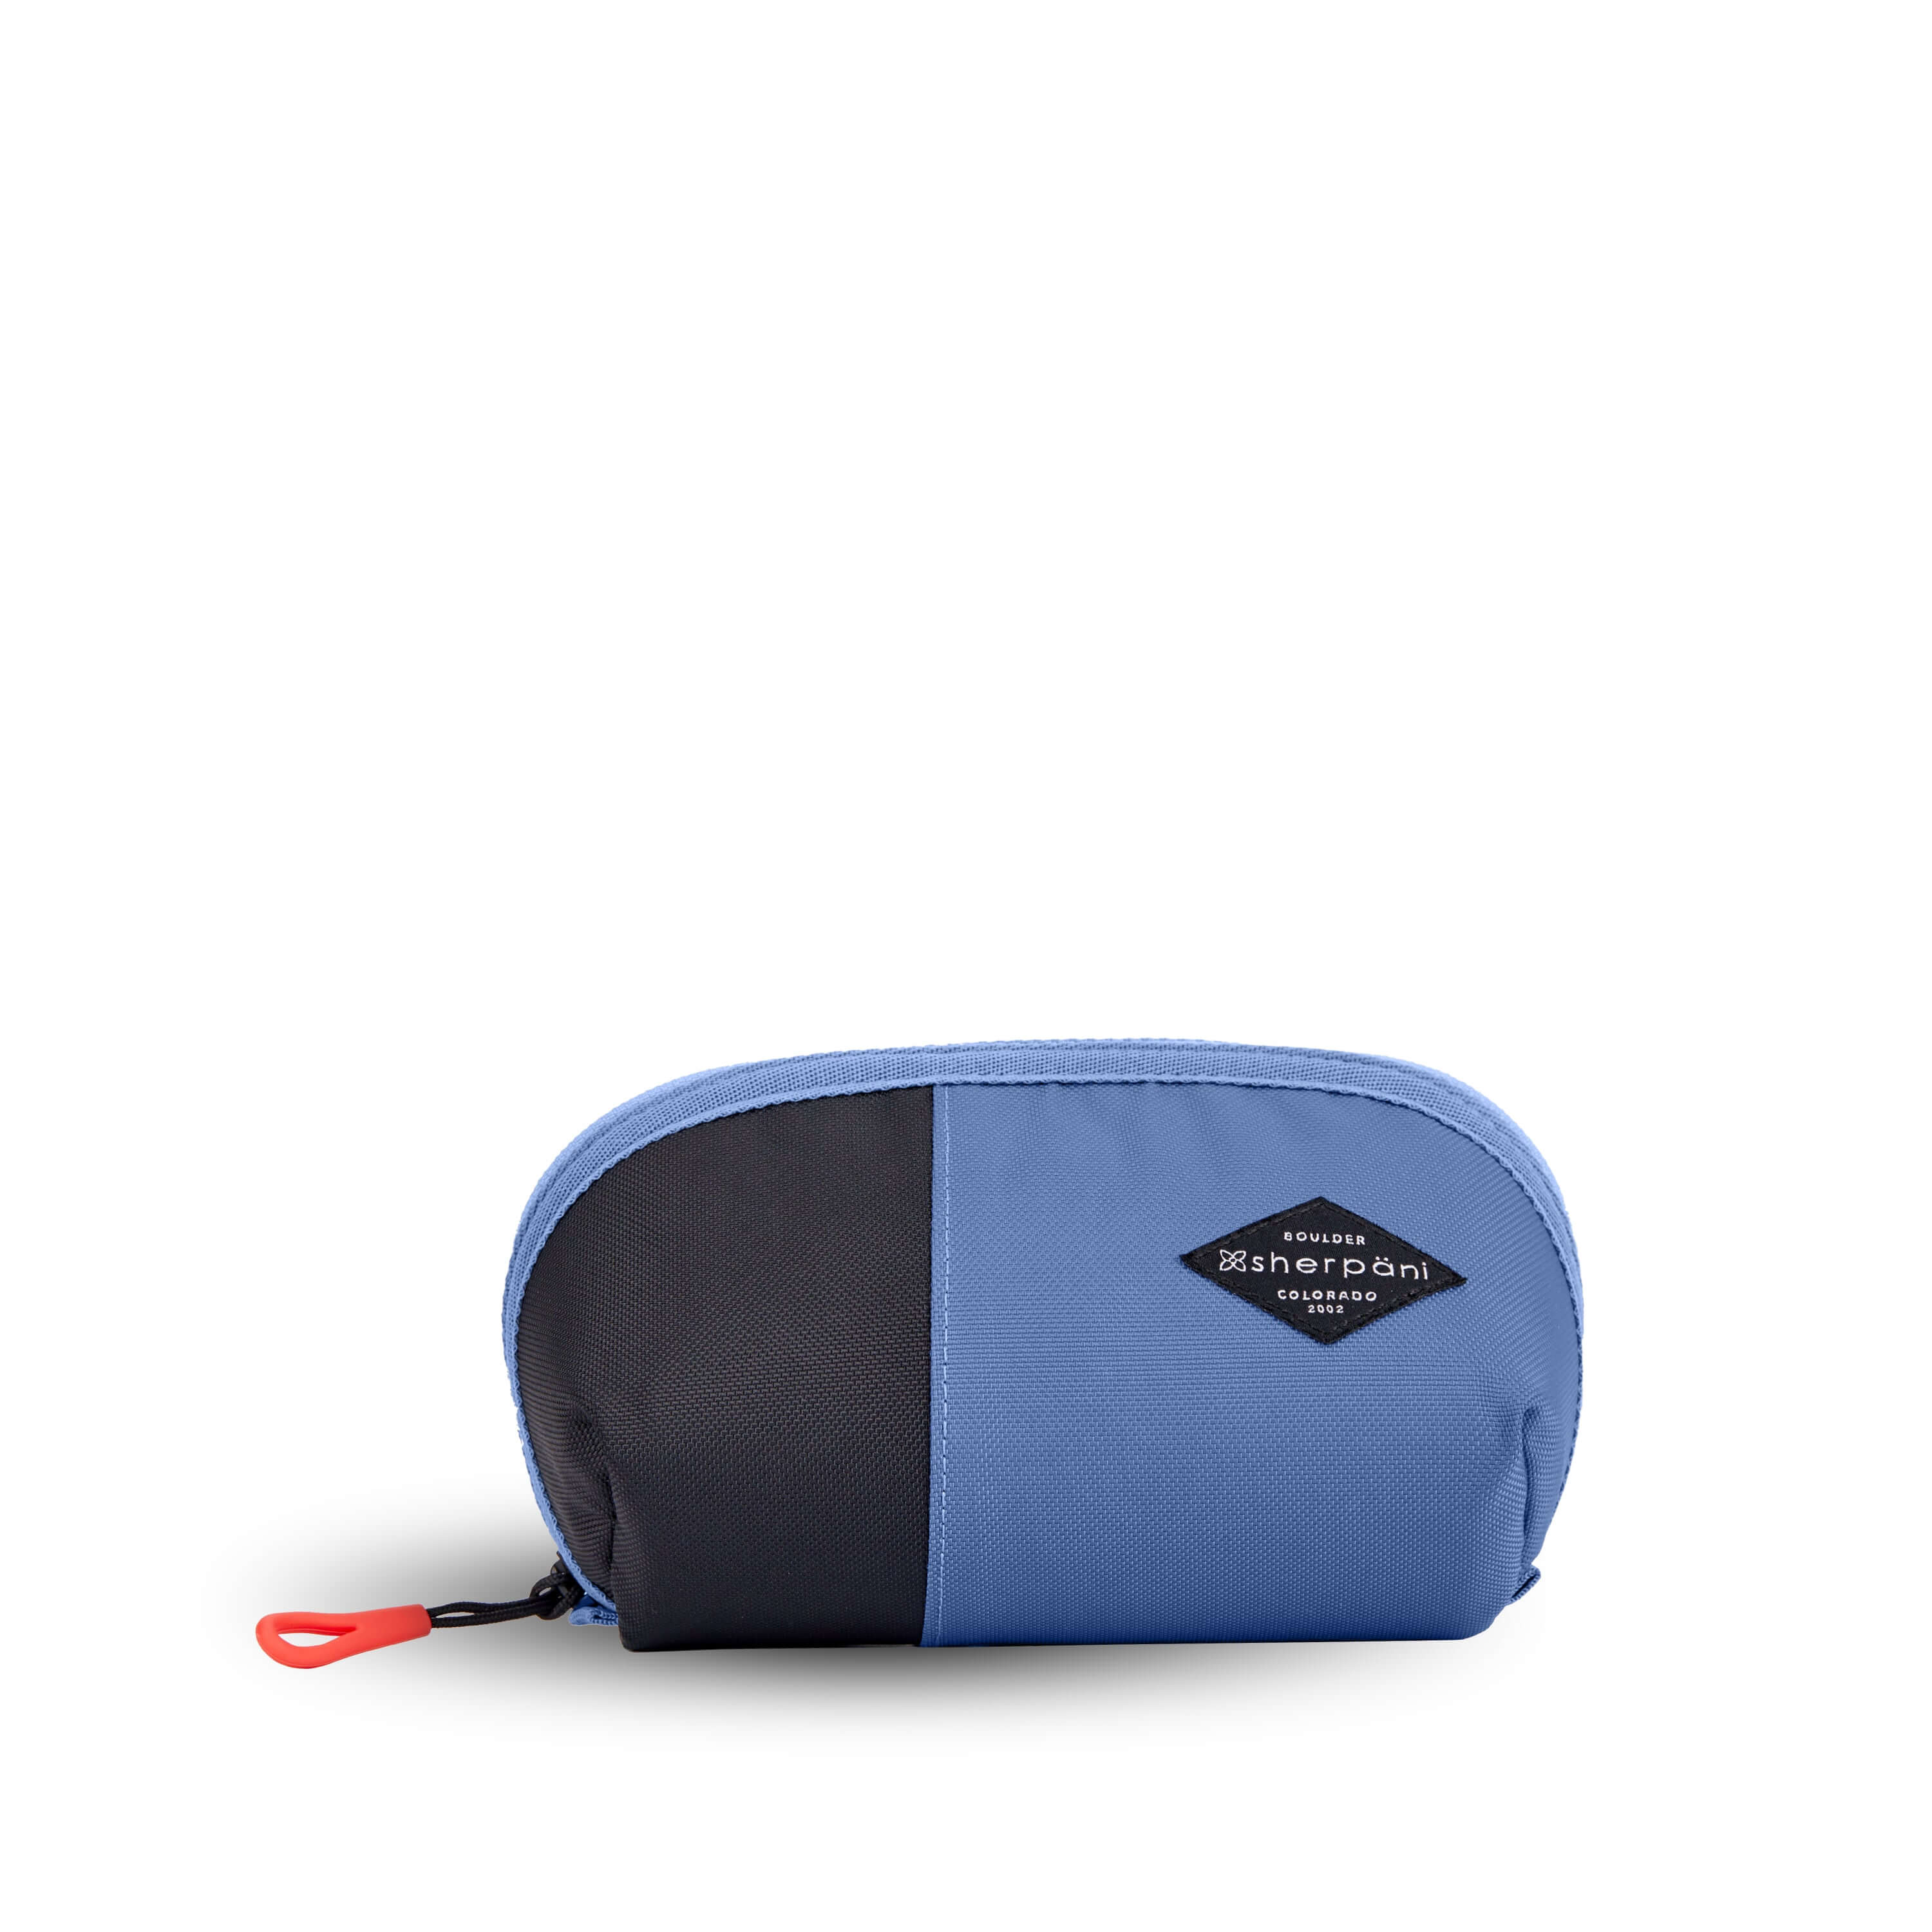 Flat front view of Sherpani travel accessory, the Harmony in Pacific Blue. The pouch is two toned in ocean blue and black. It has an easy pull zipper that is accented in red. 